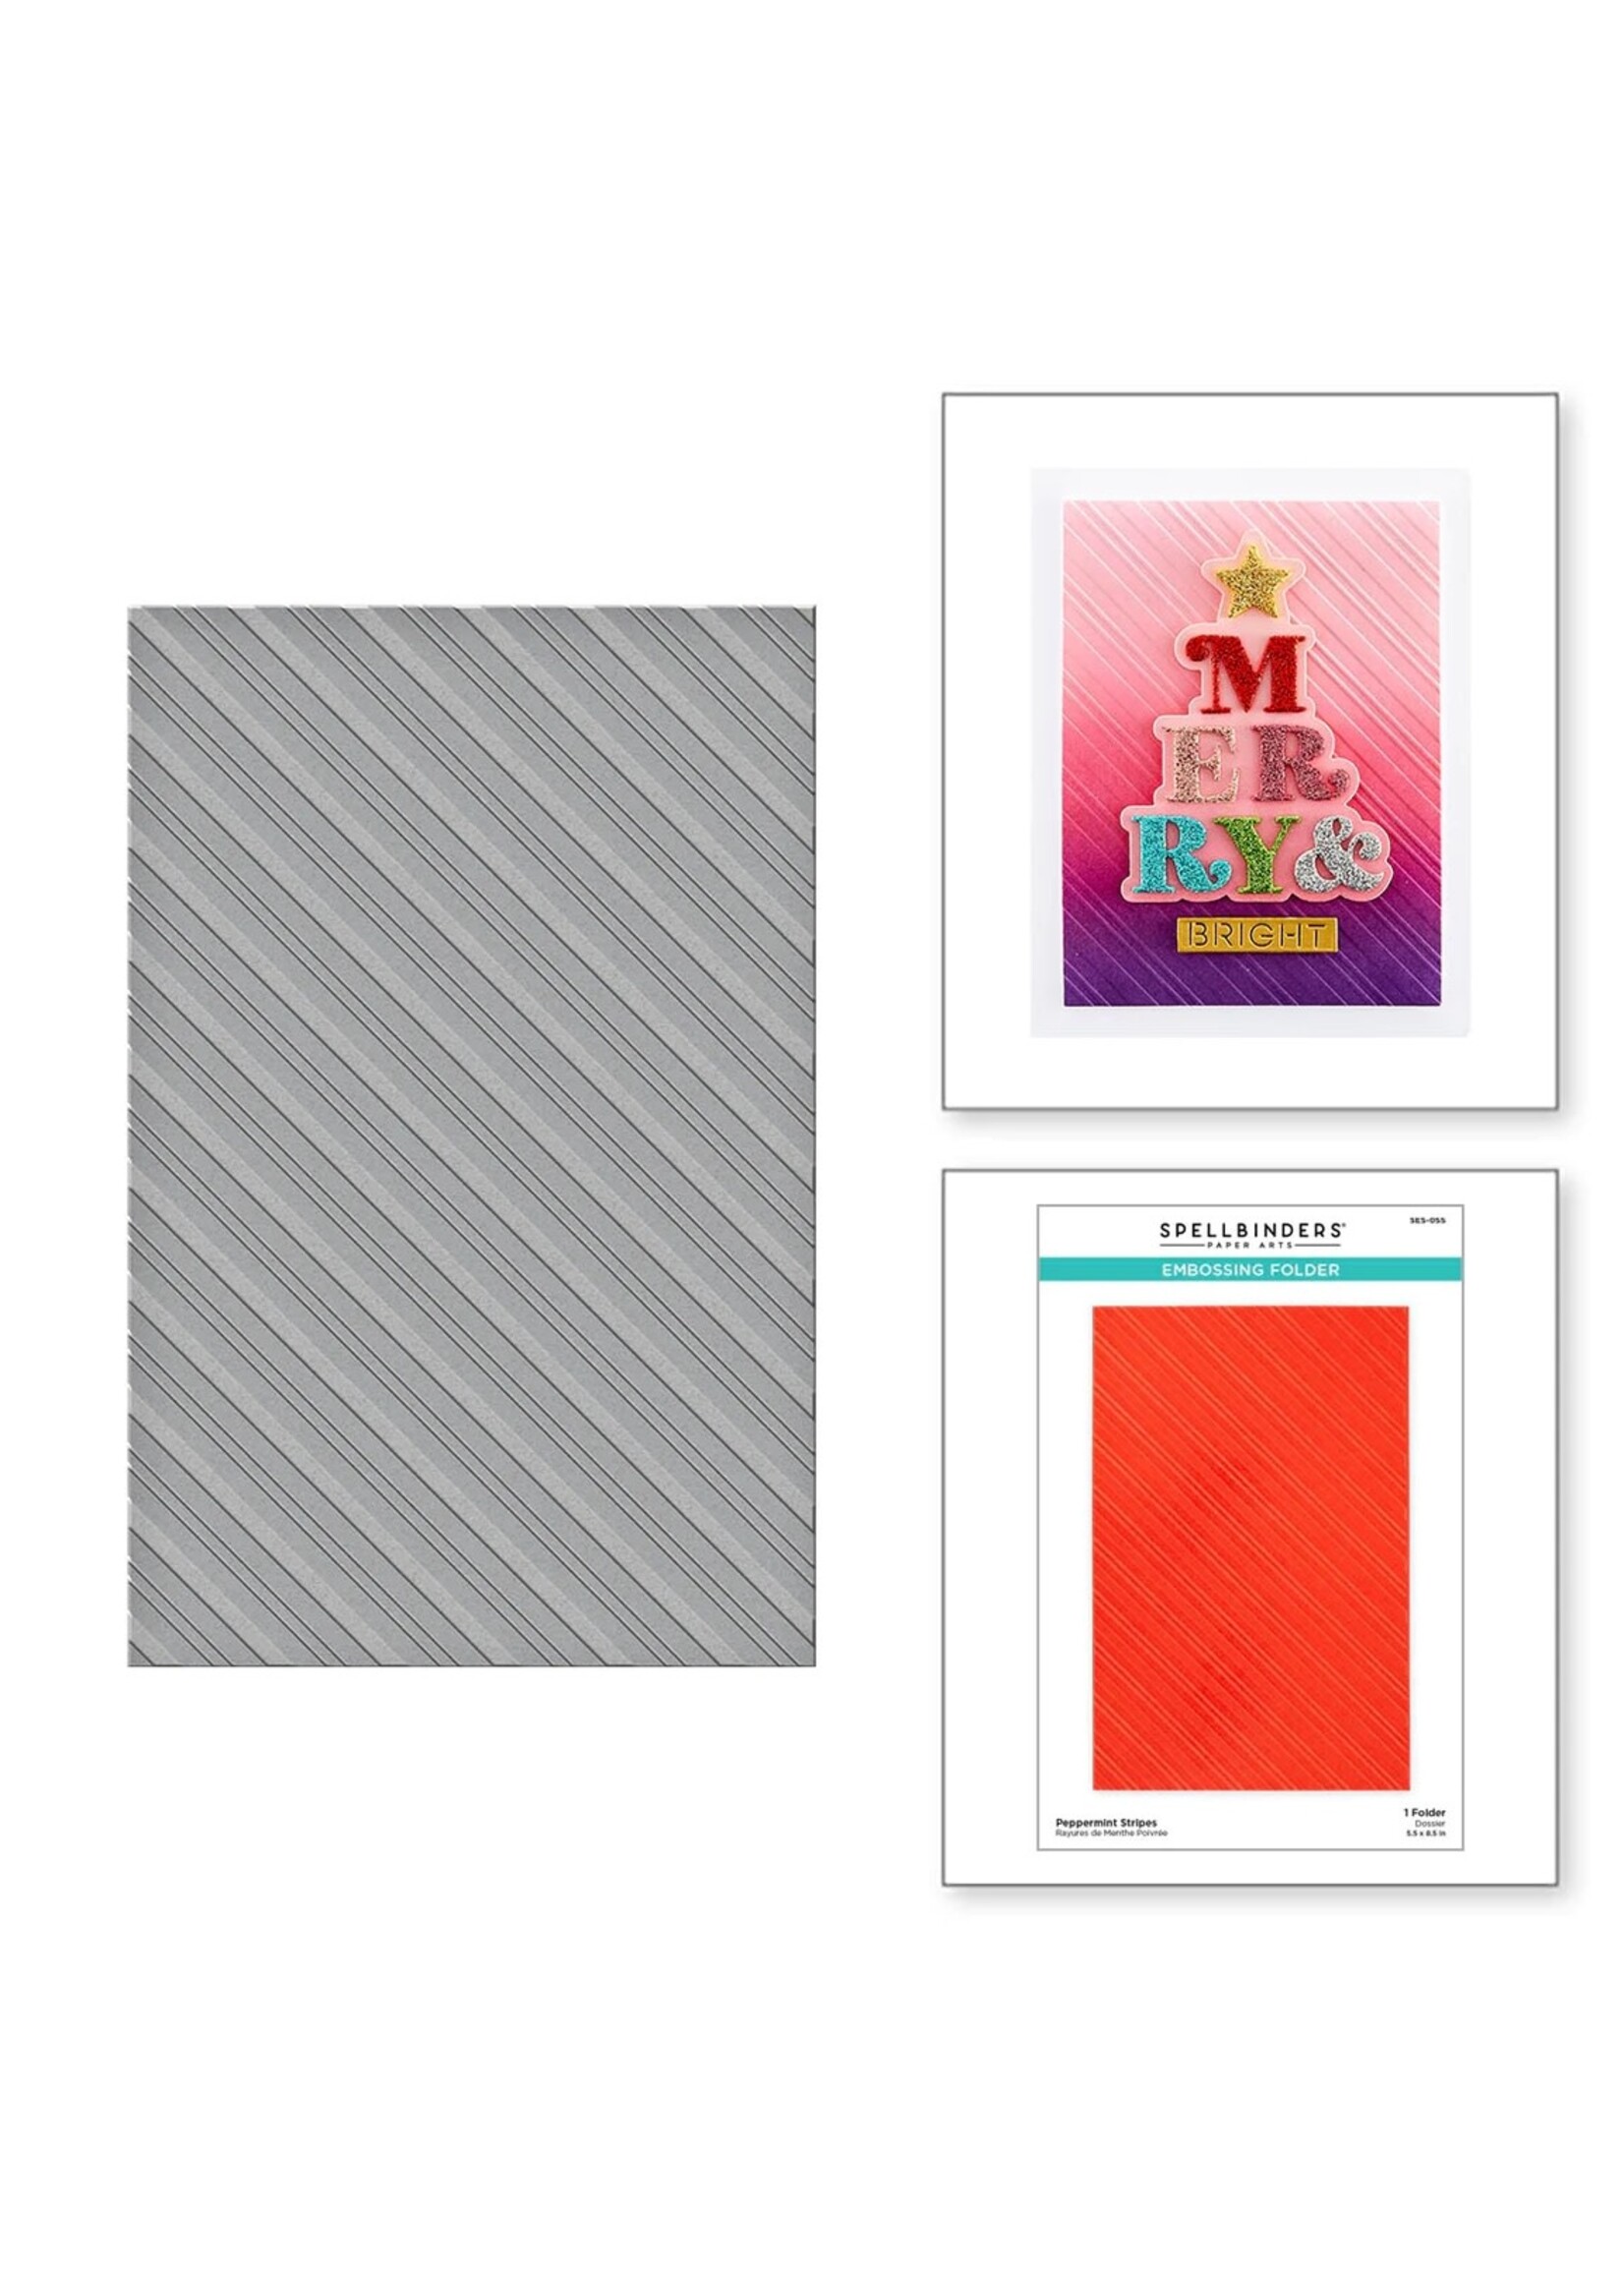 spellbinders Peppermint Stripes Embossing Folder from the Merry & Bright Collection